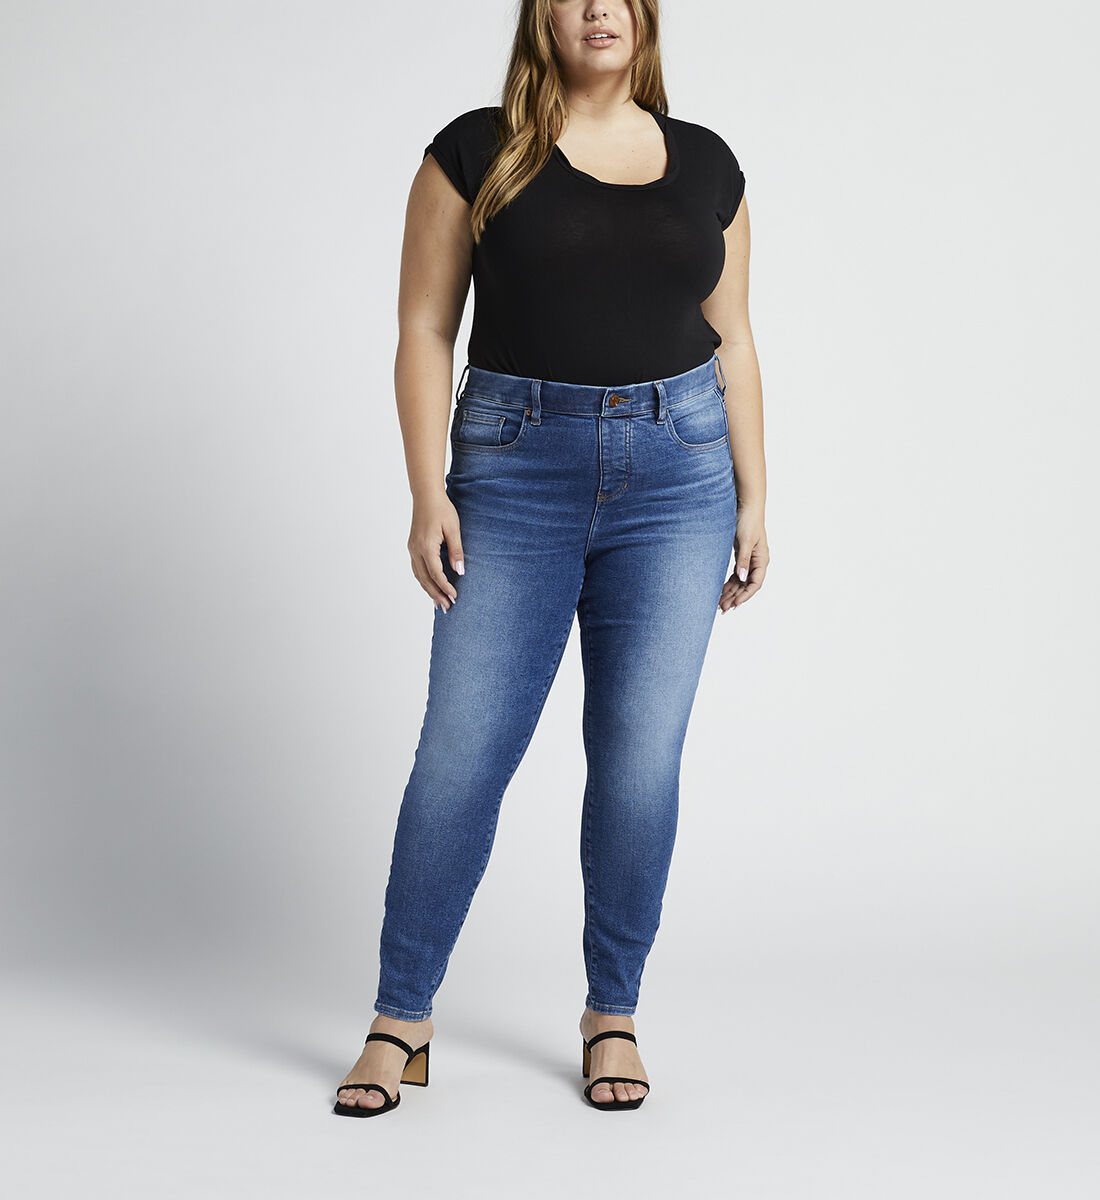 Valentina High Rise Skinny Jeans Plus Size Front